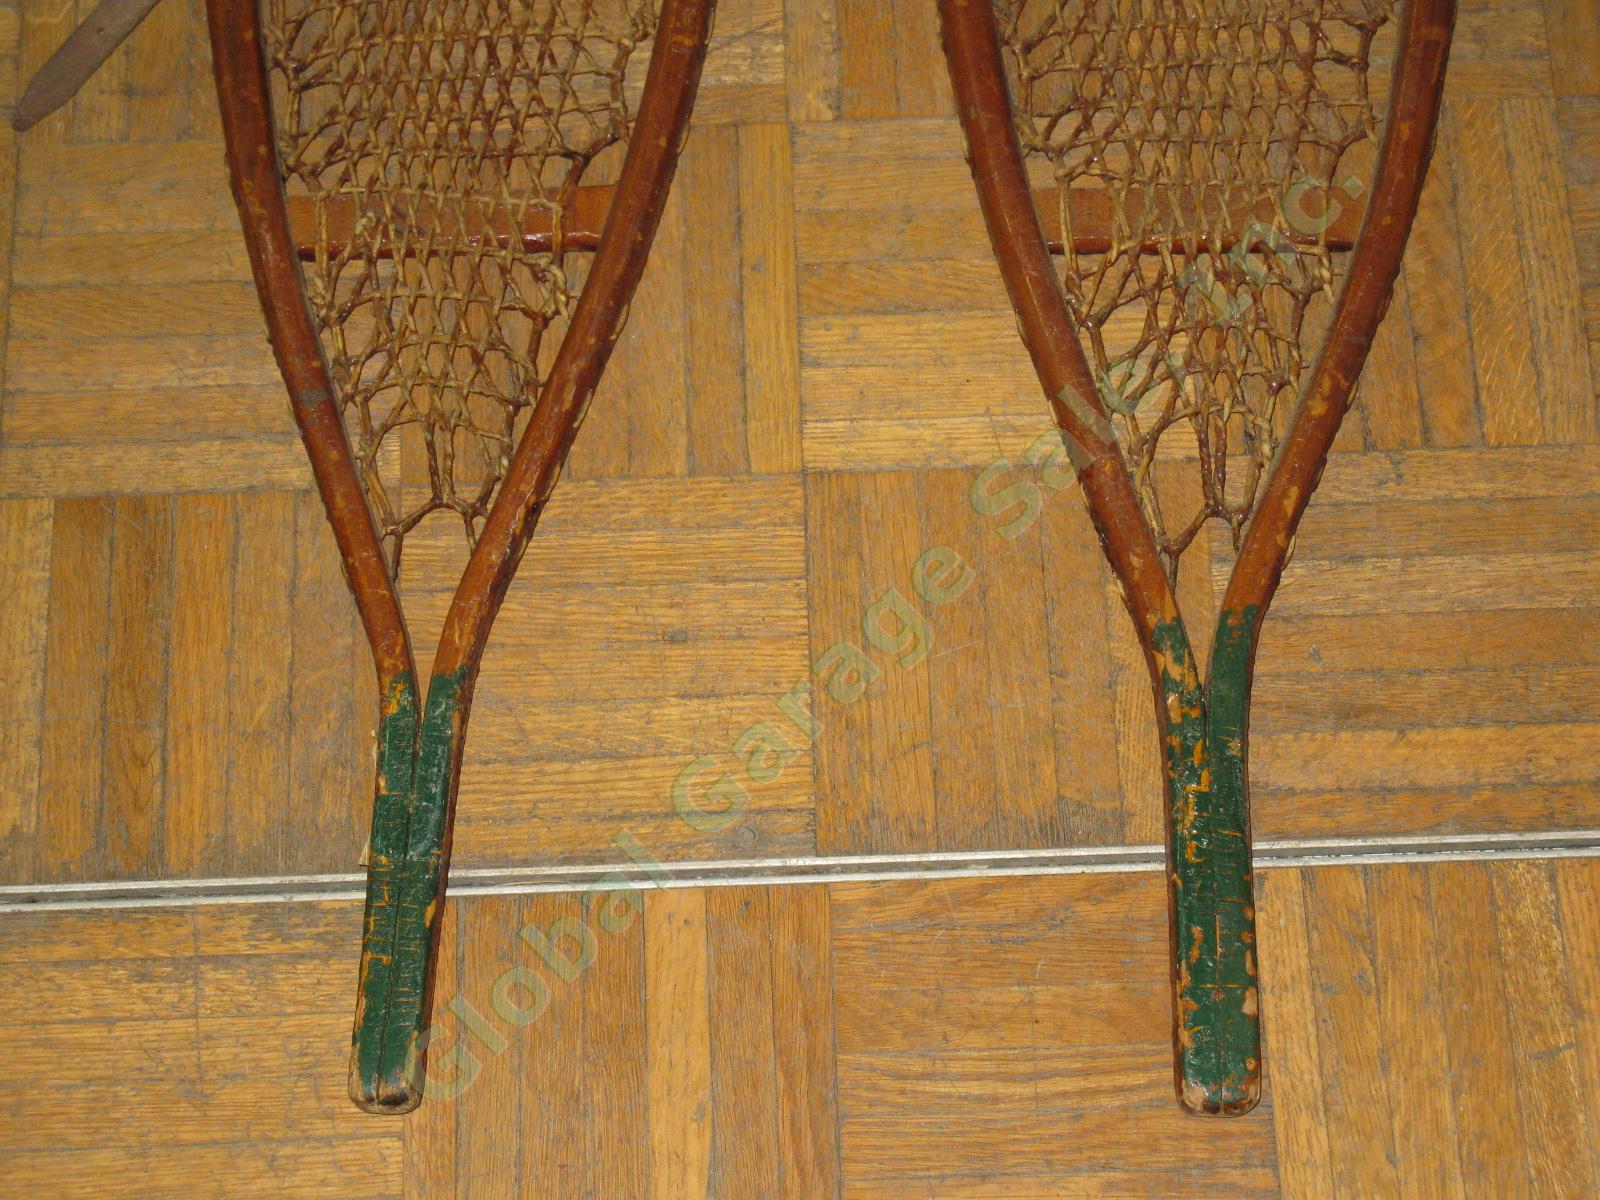 Vtg Antique Lund Hastings Minnesota 10x56 Wooden Frame Leather Binding Snowshoes 5